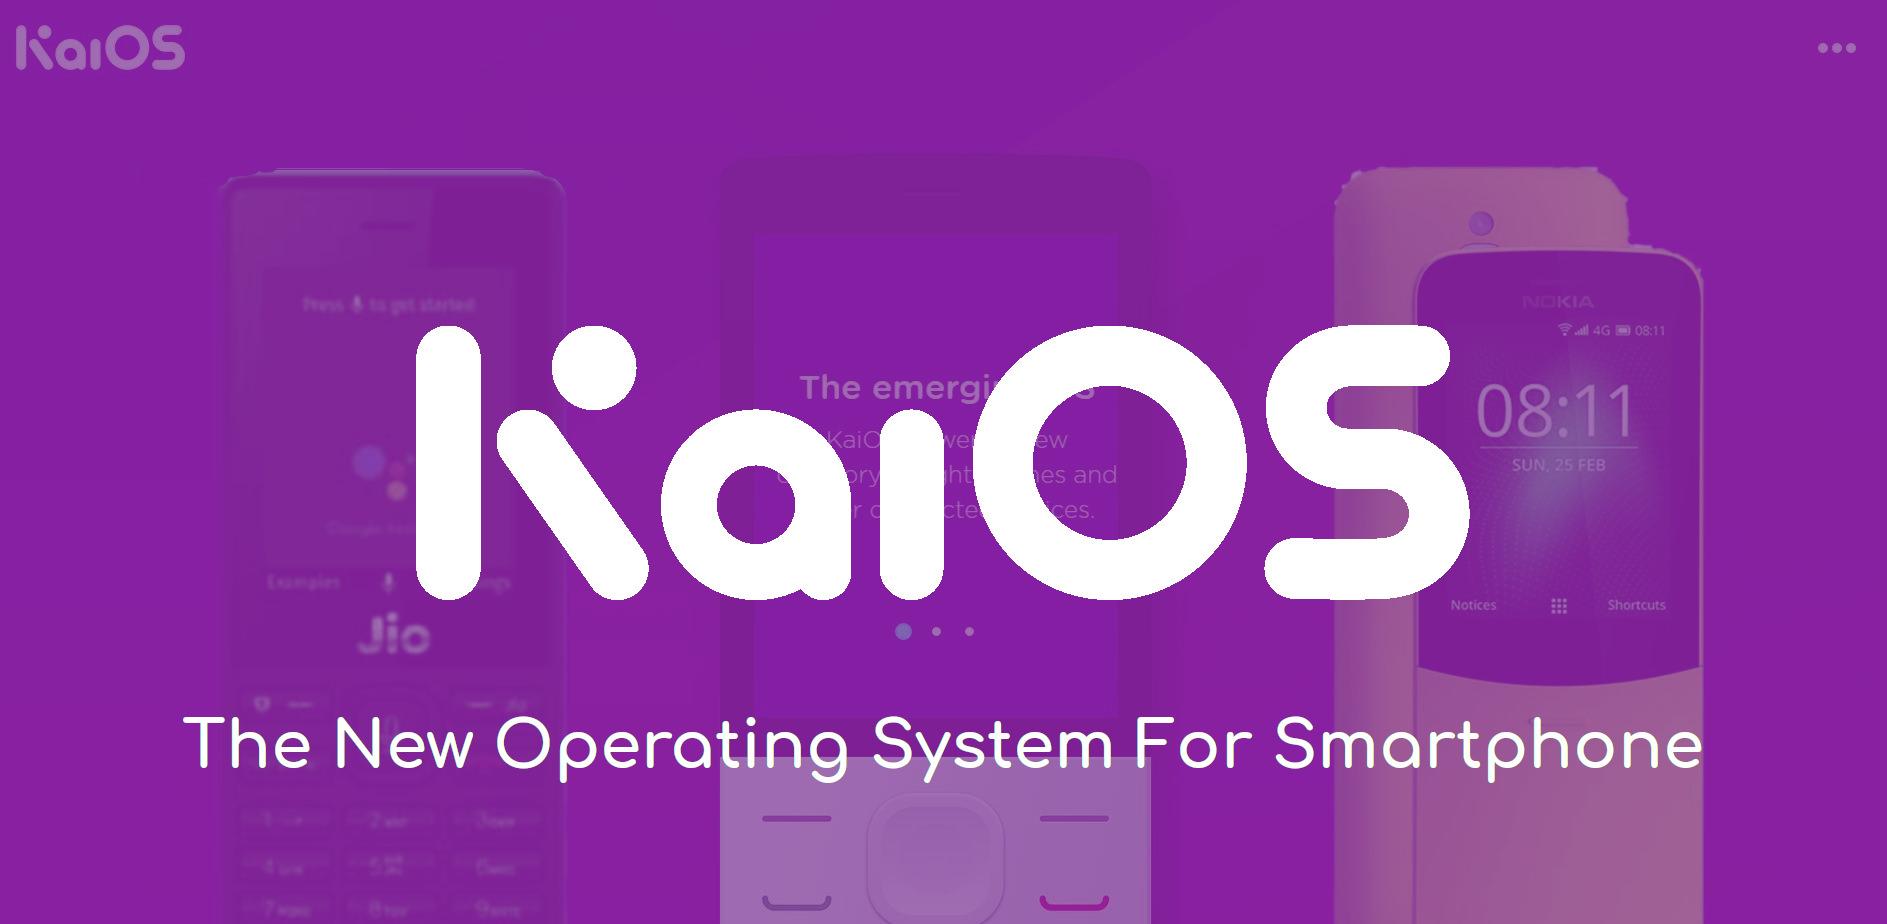 KaiOS and its features